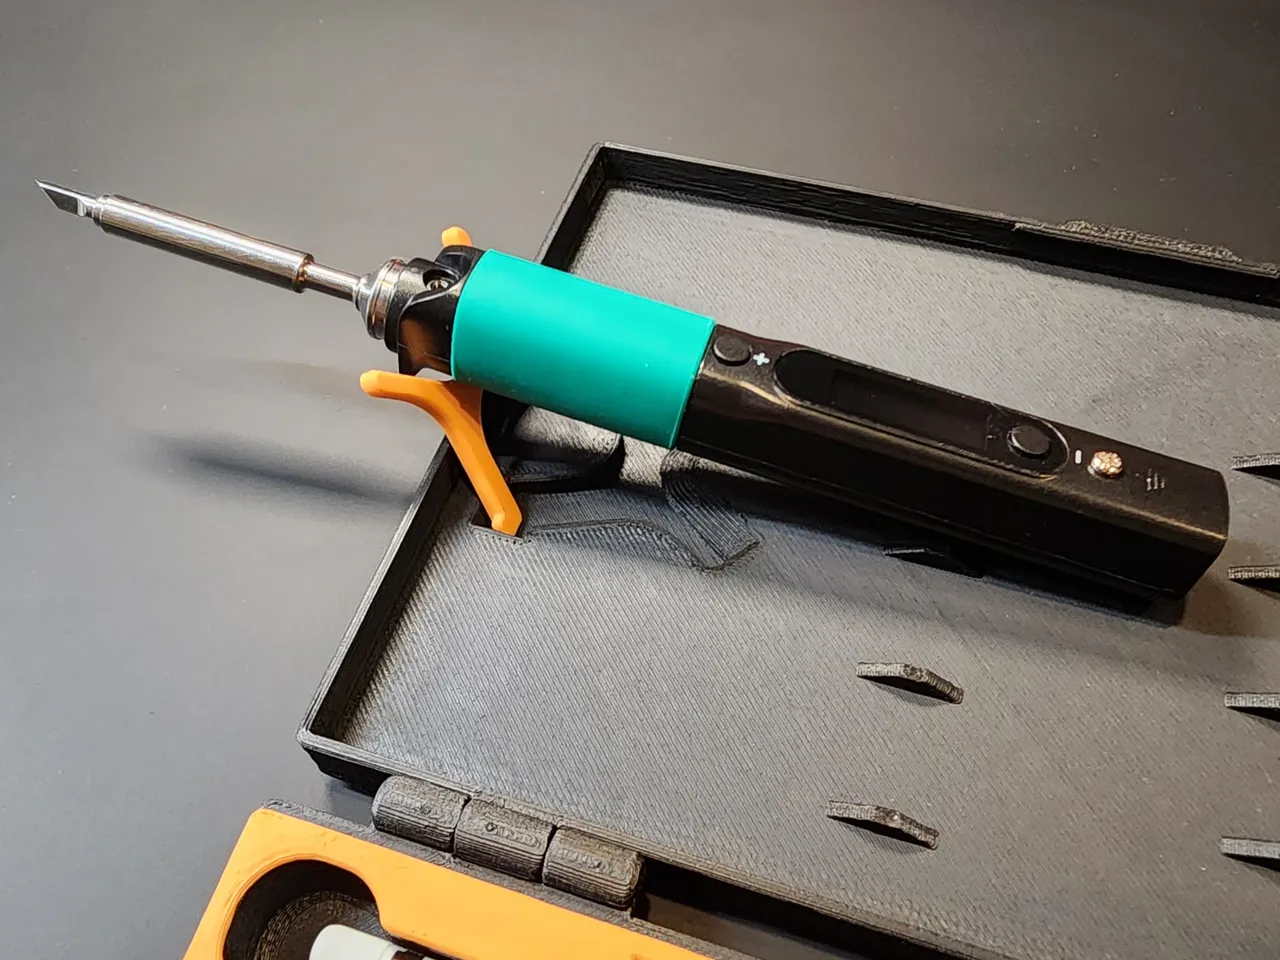 PINECIL v2 - MiniPortable Soldering Iron